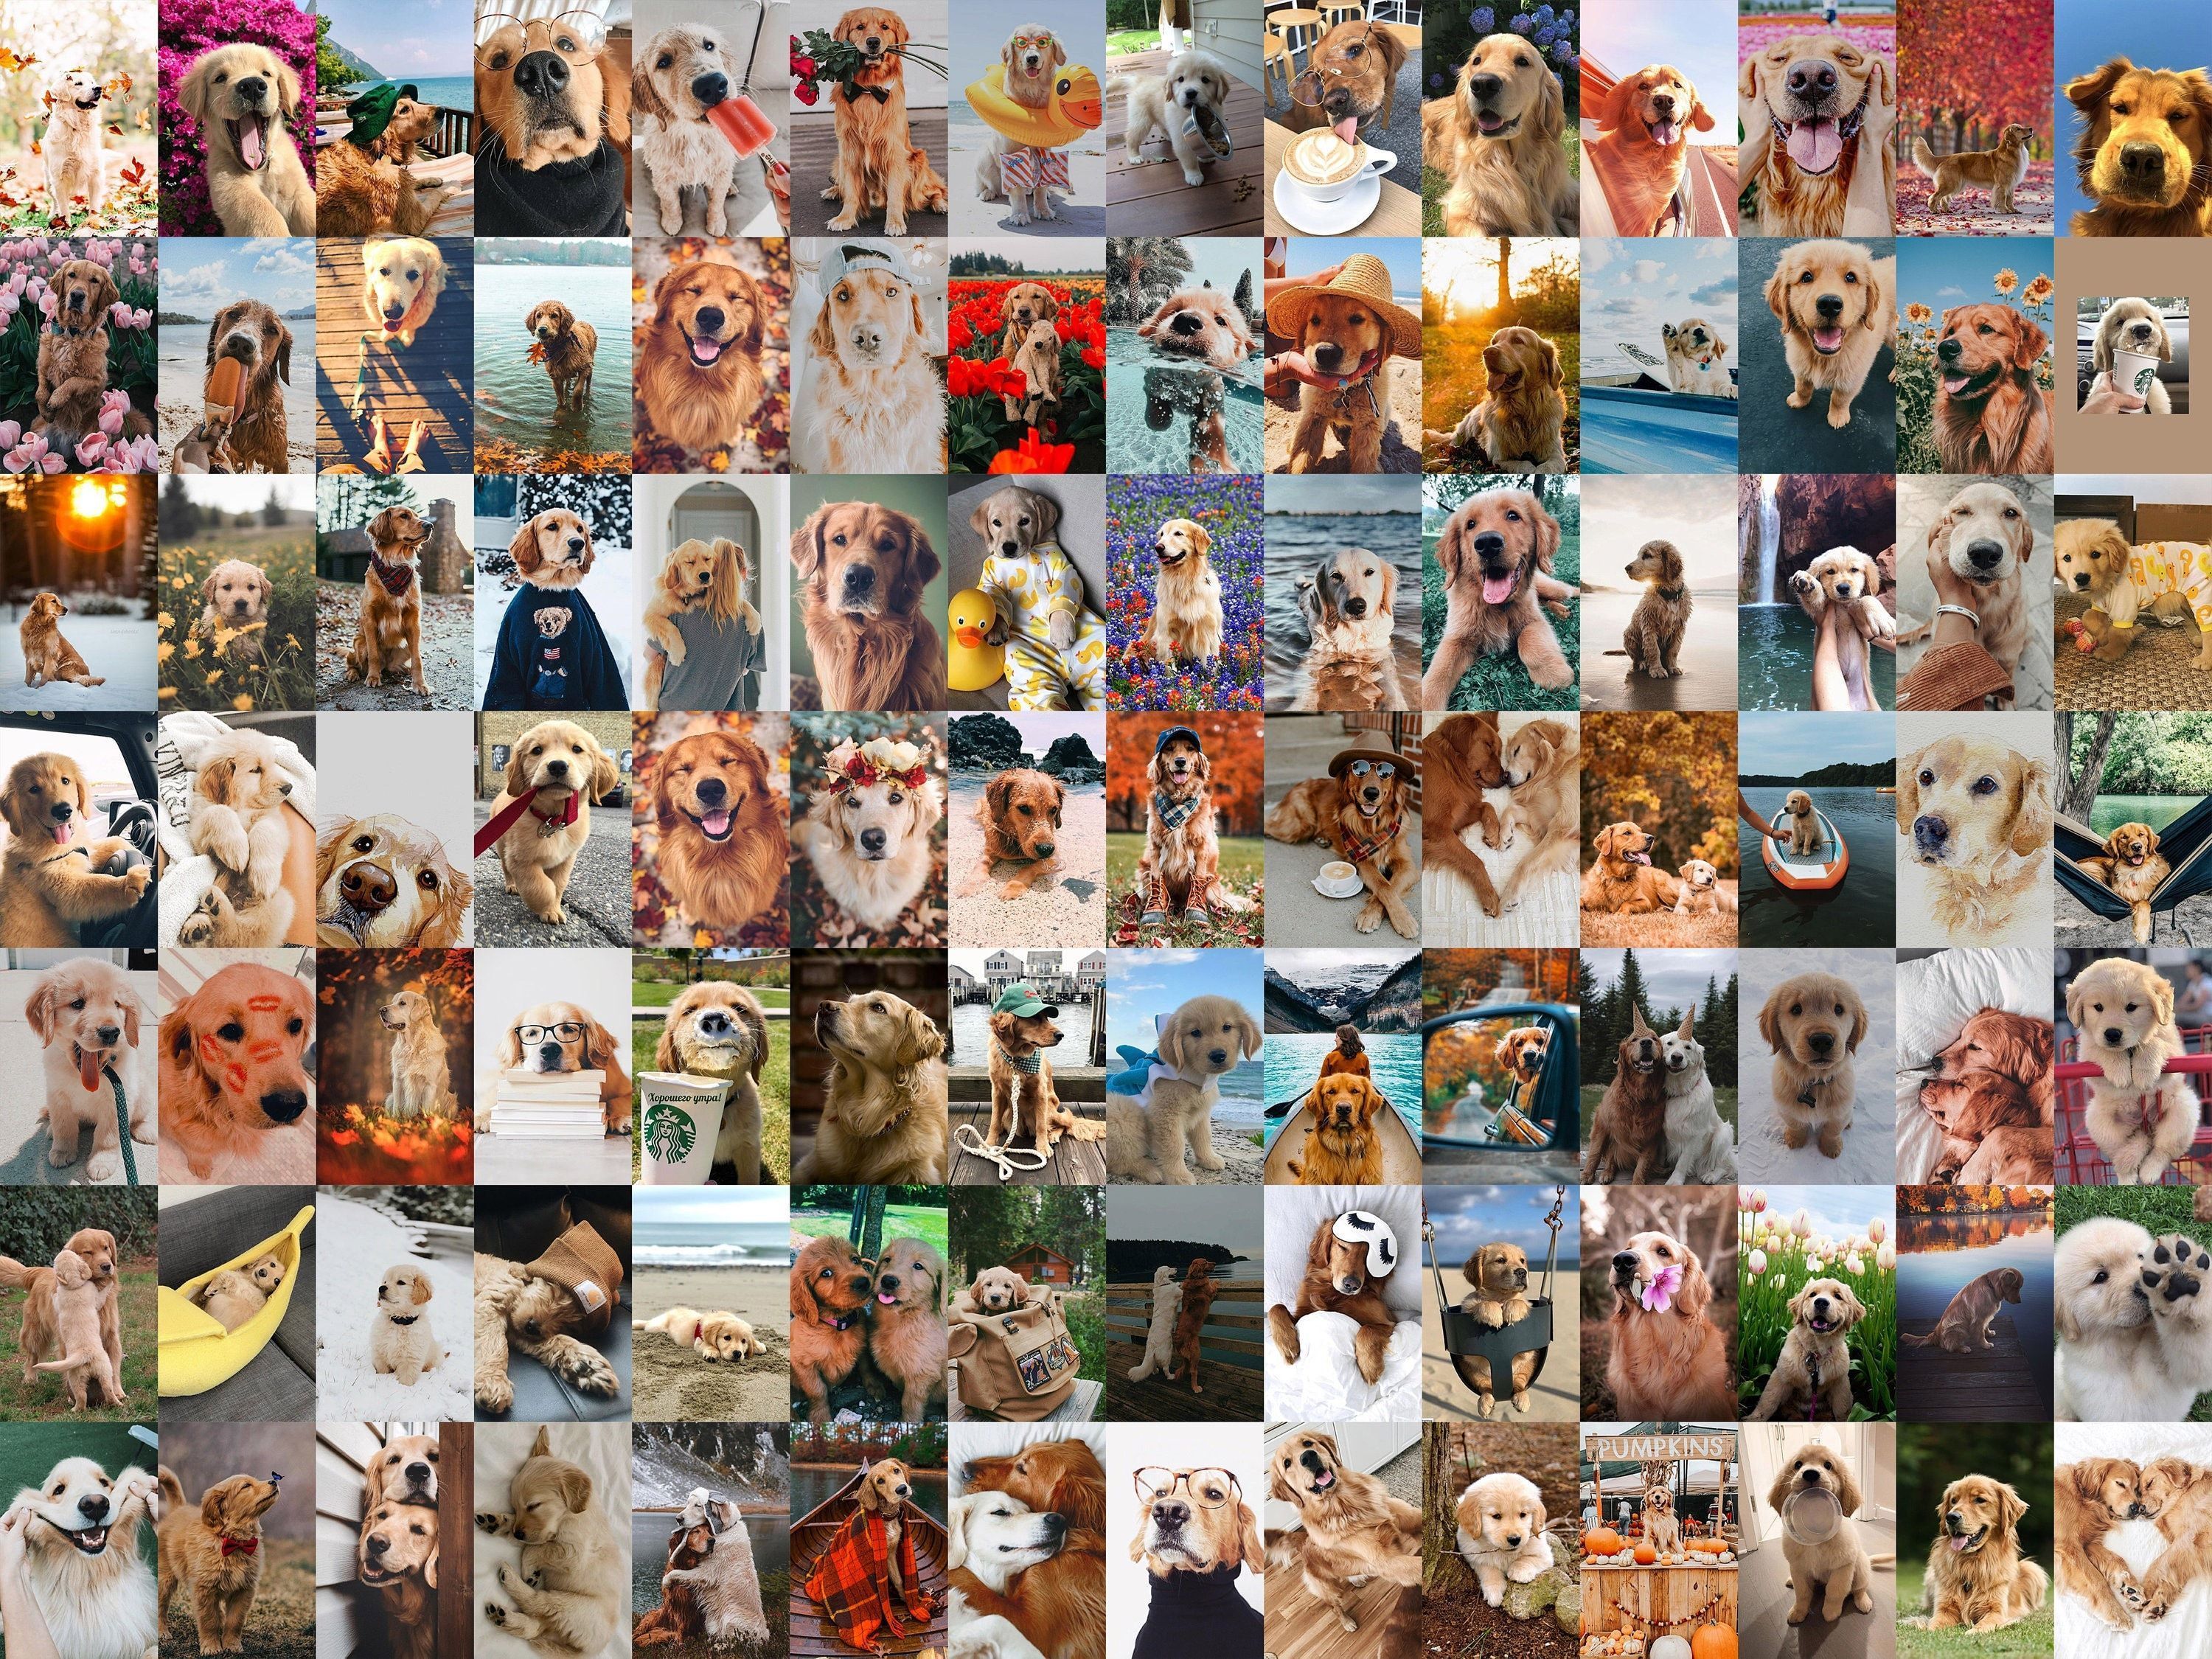 A collage of many different dogs in various poses - Dog, puppy